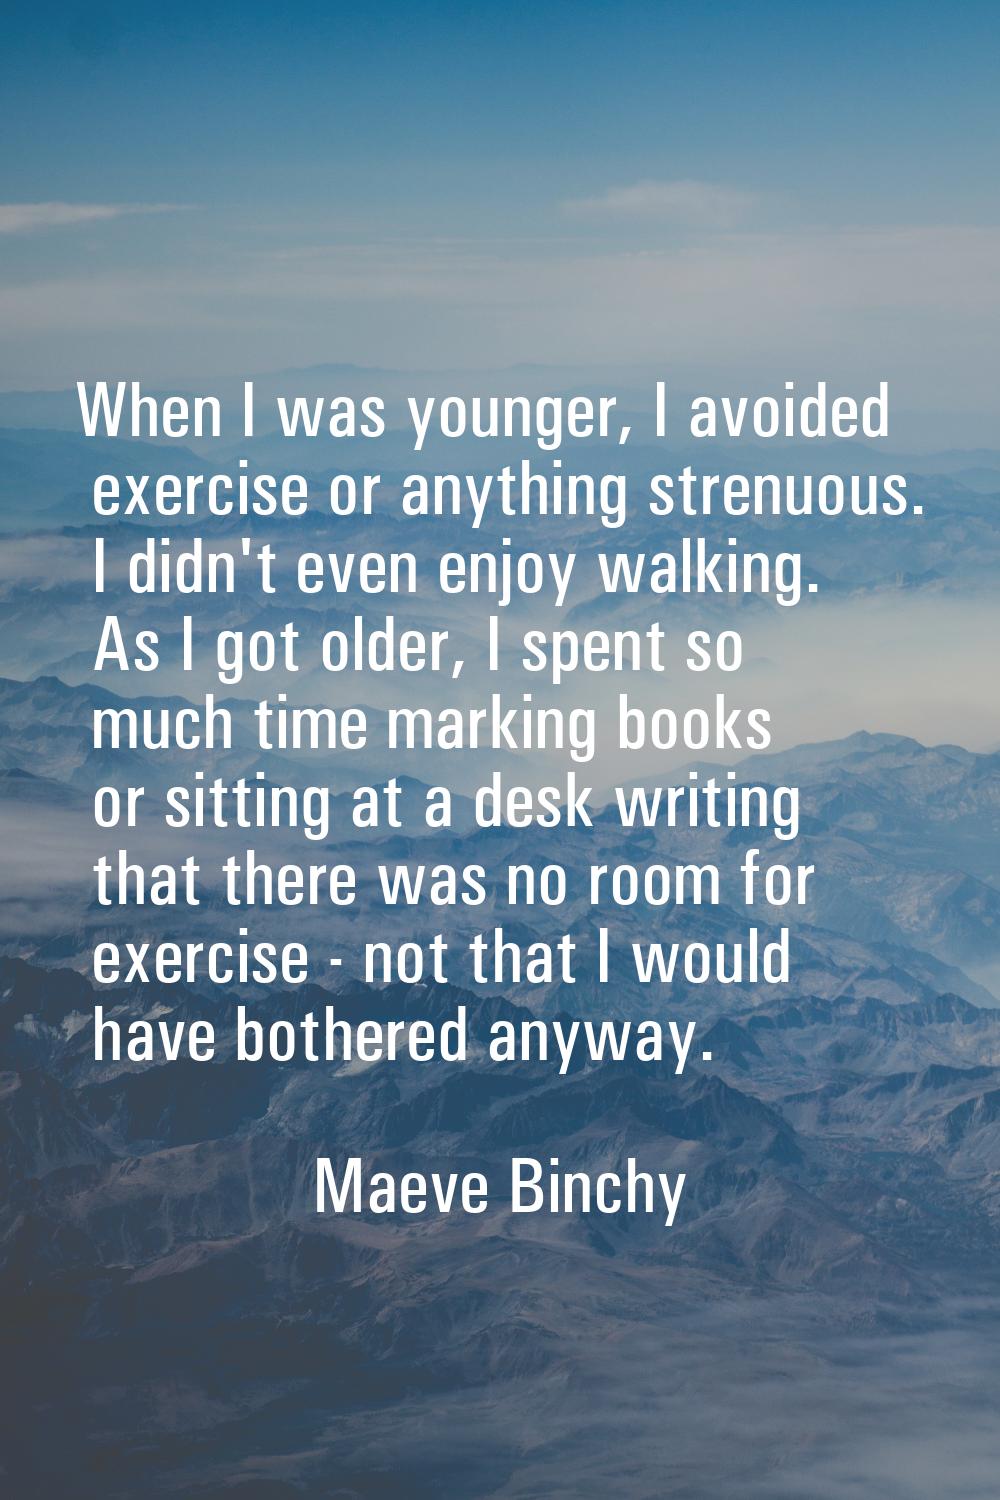 When I was younger, I avoided exercise or anything strenuous. I didn't even enjoy walking. As I got